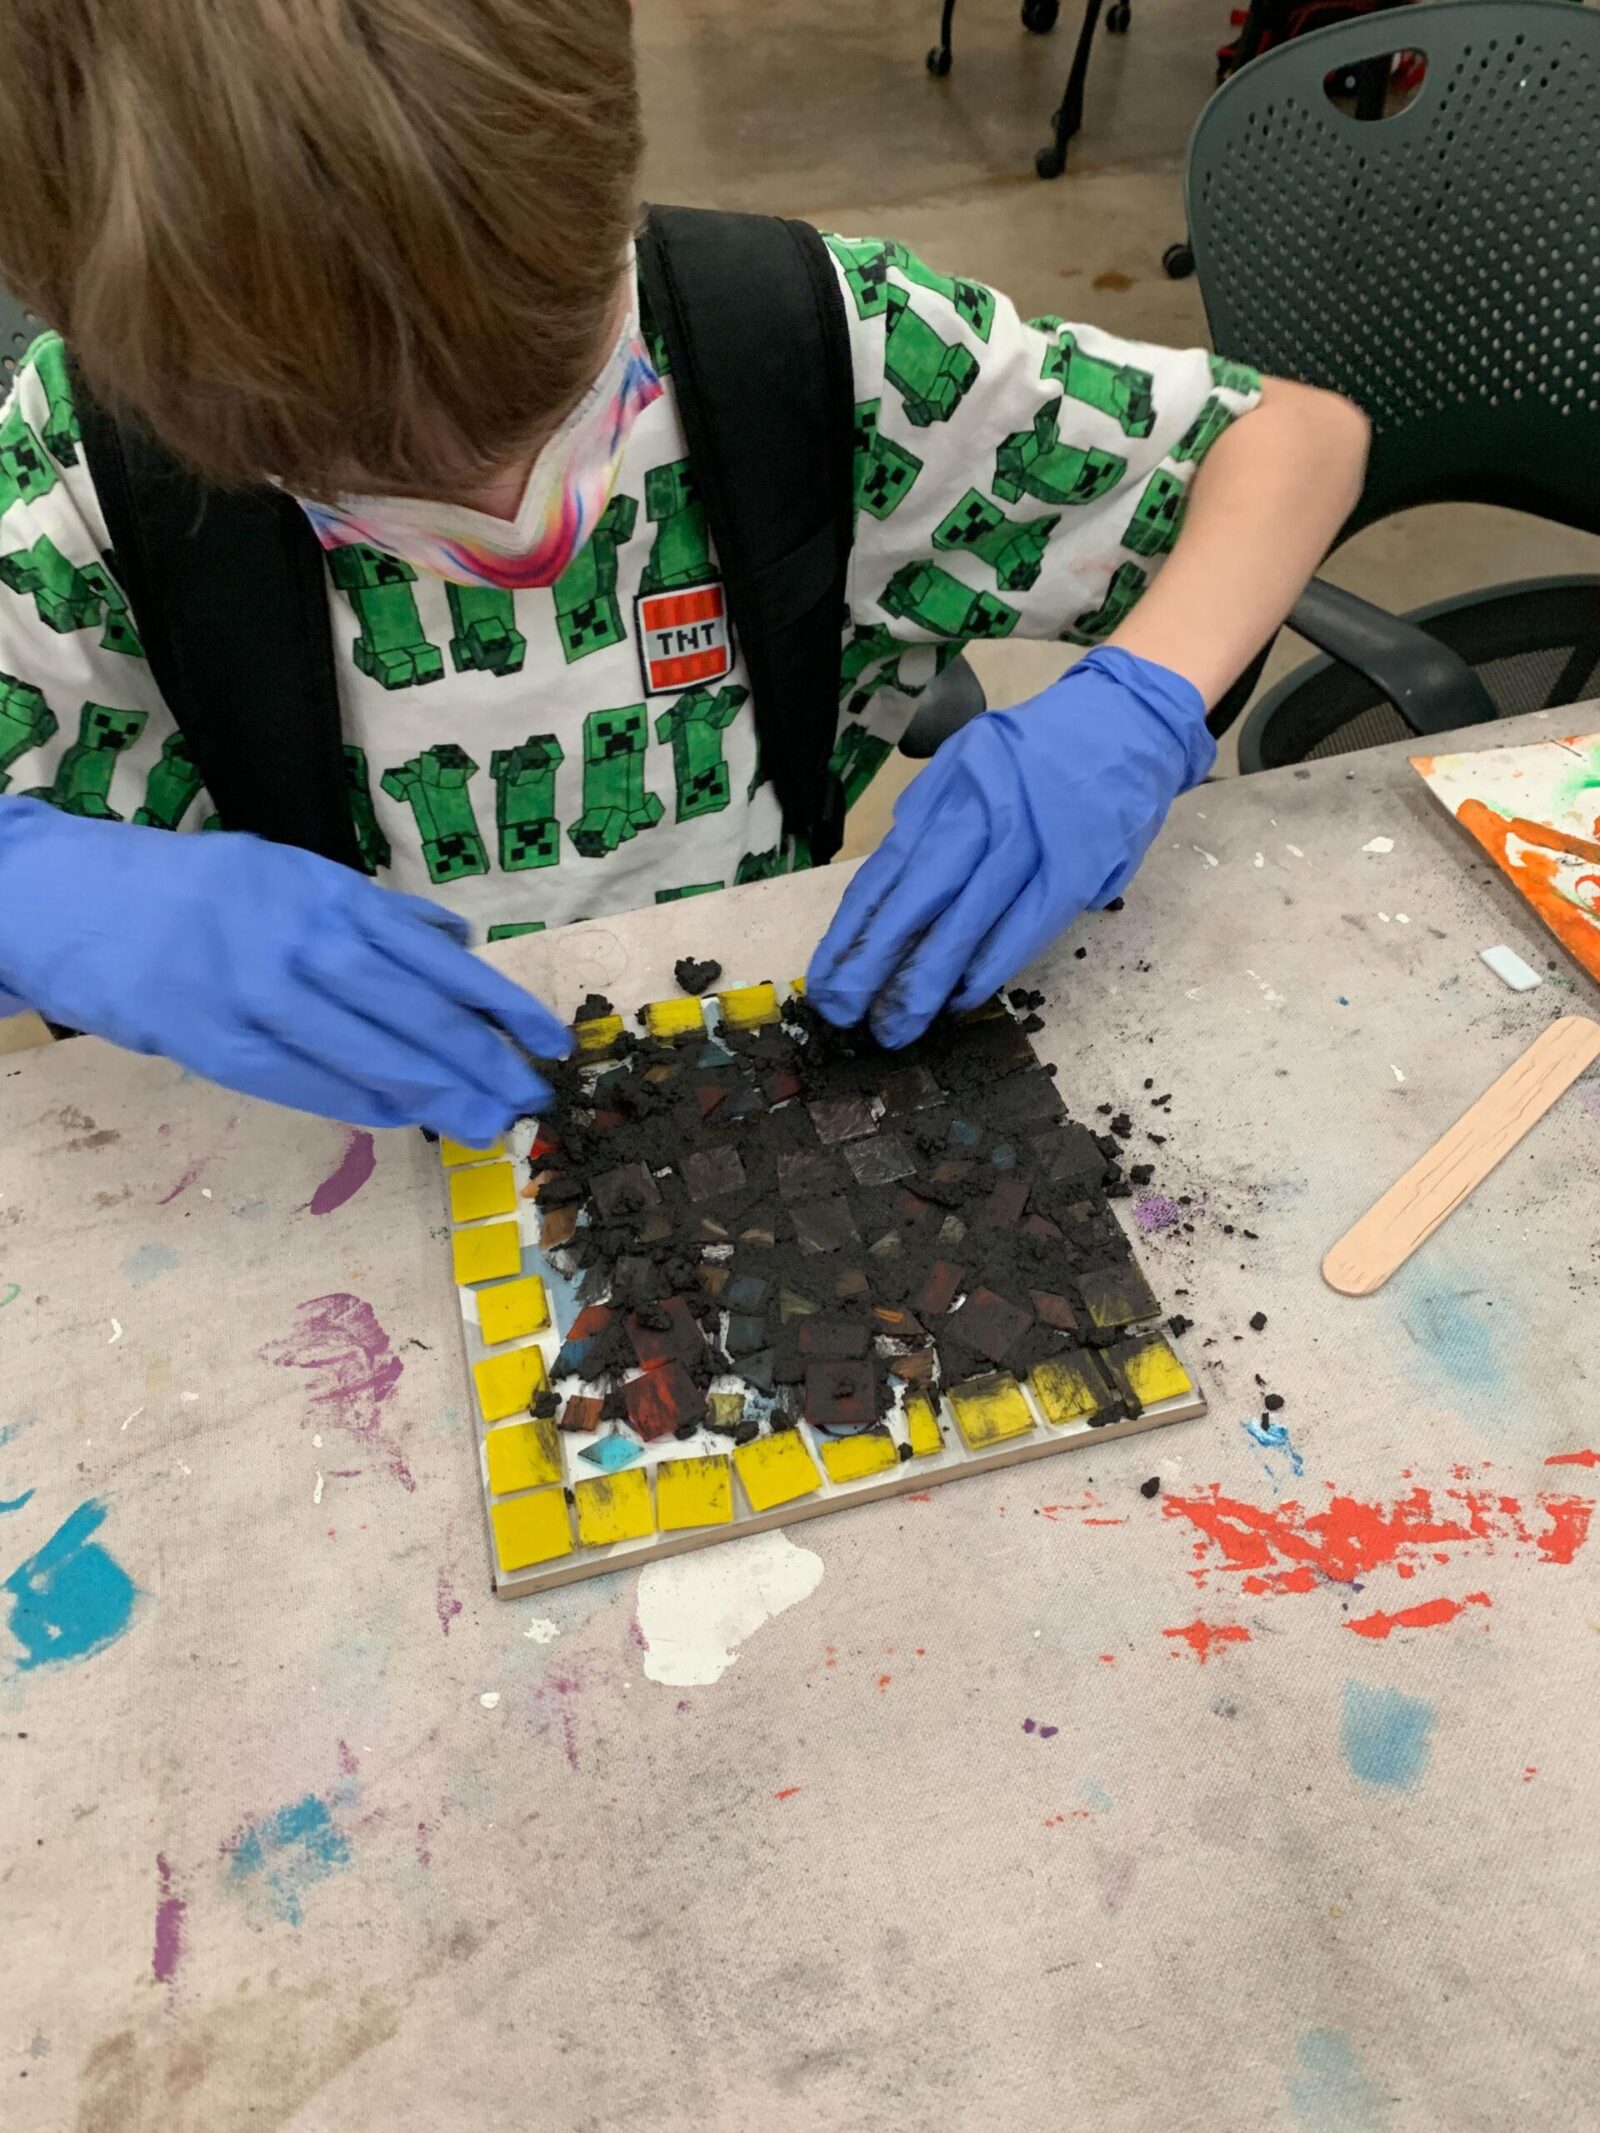 Student grouting their mosaic tile project